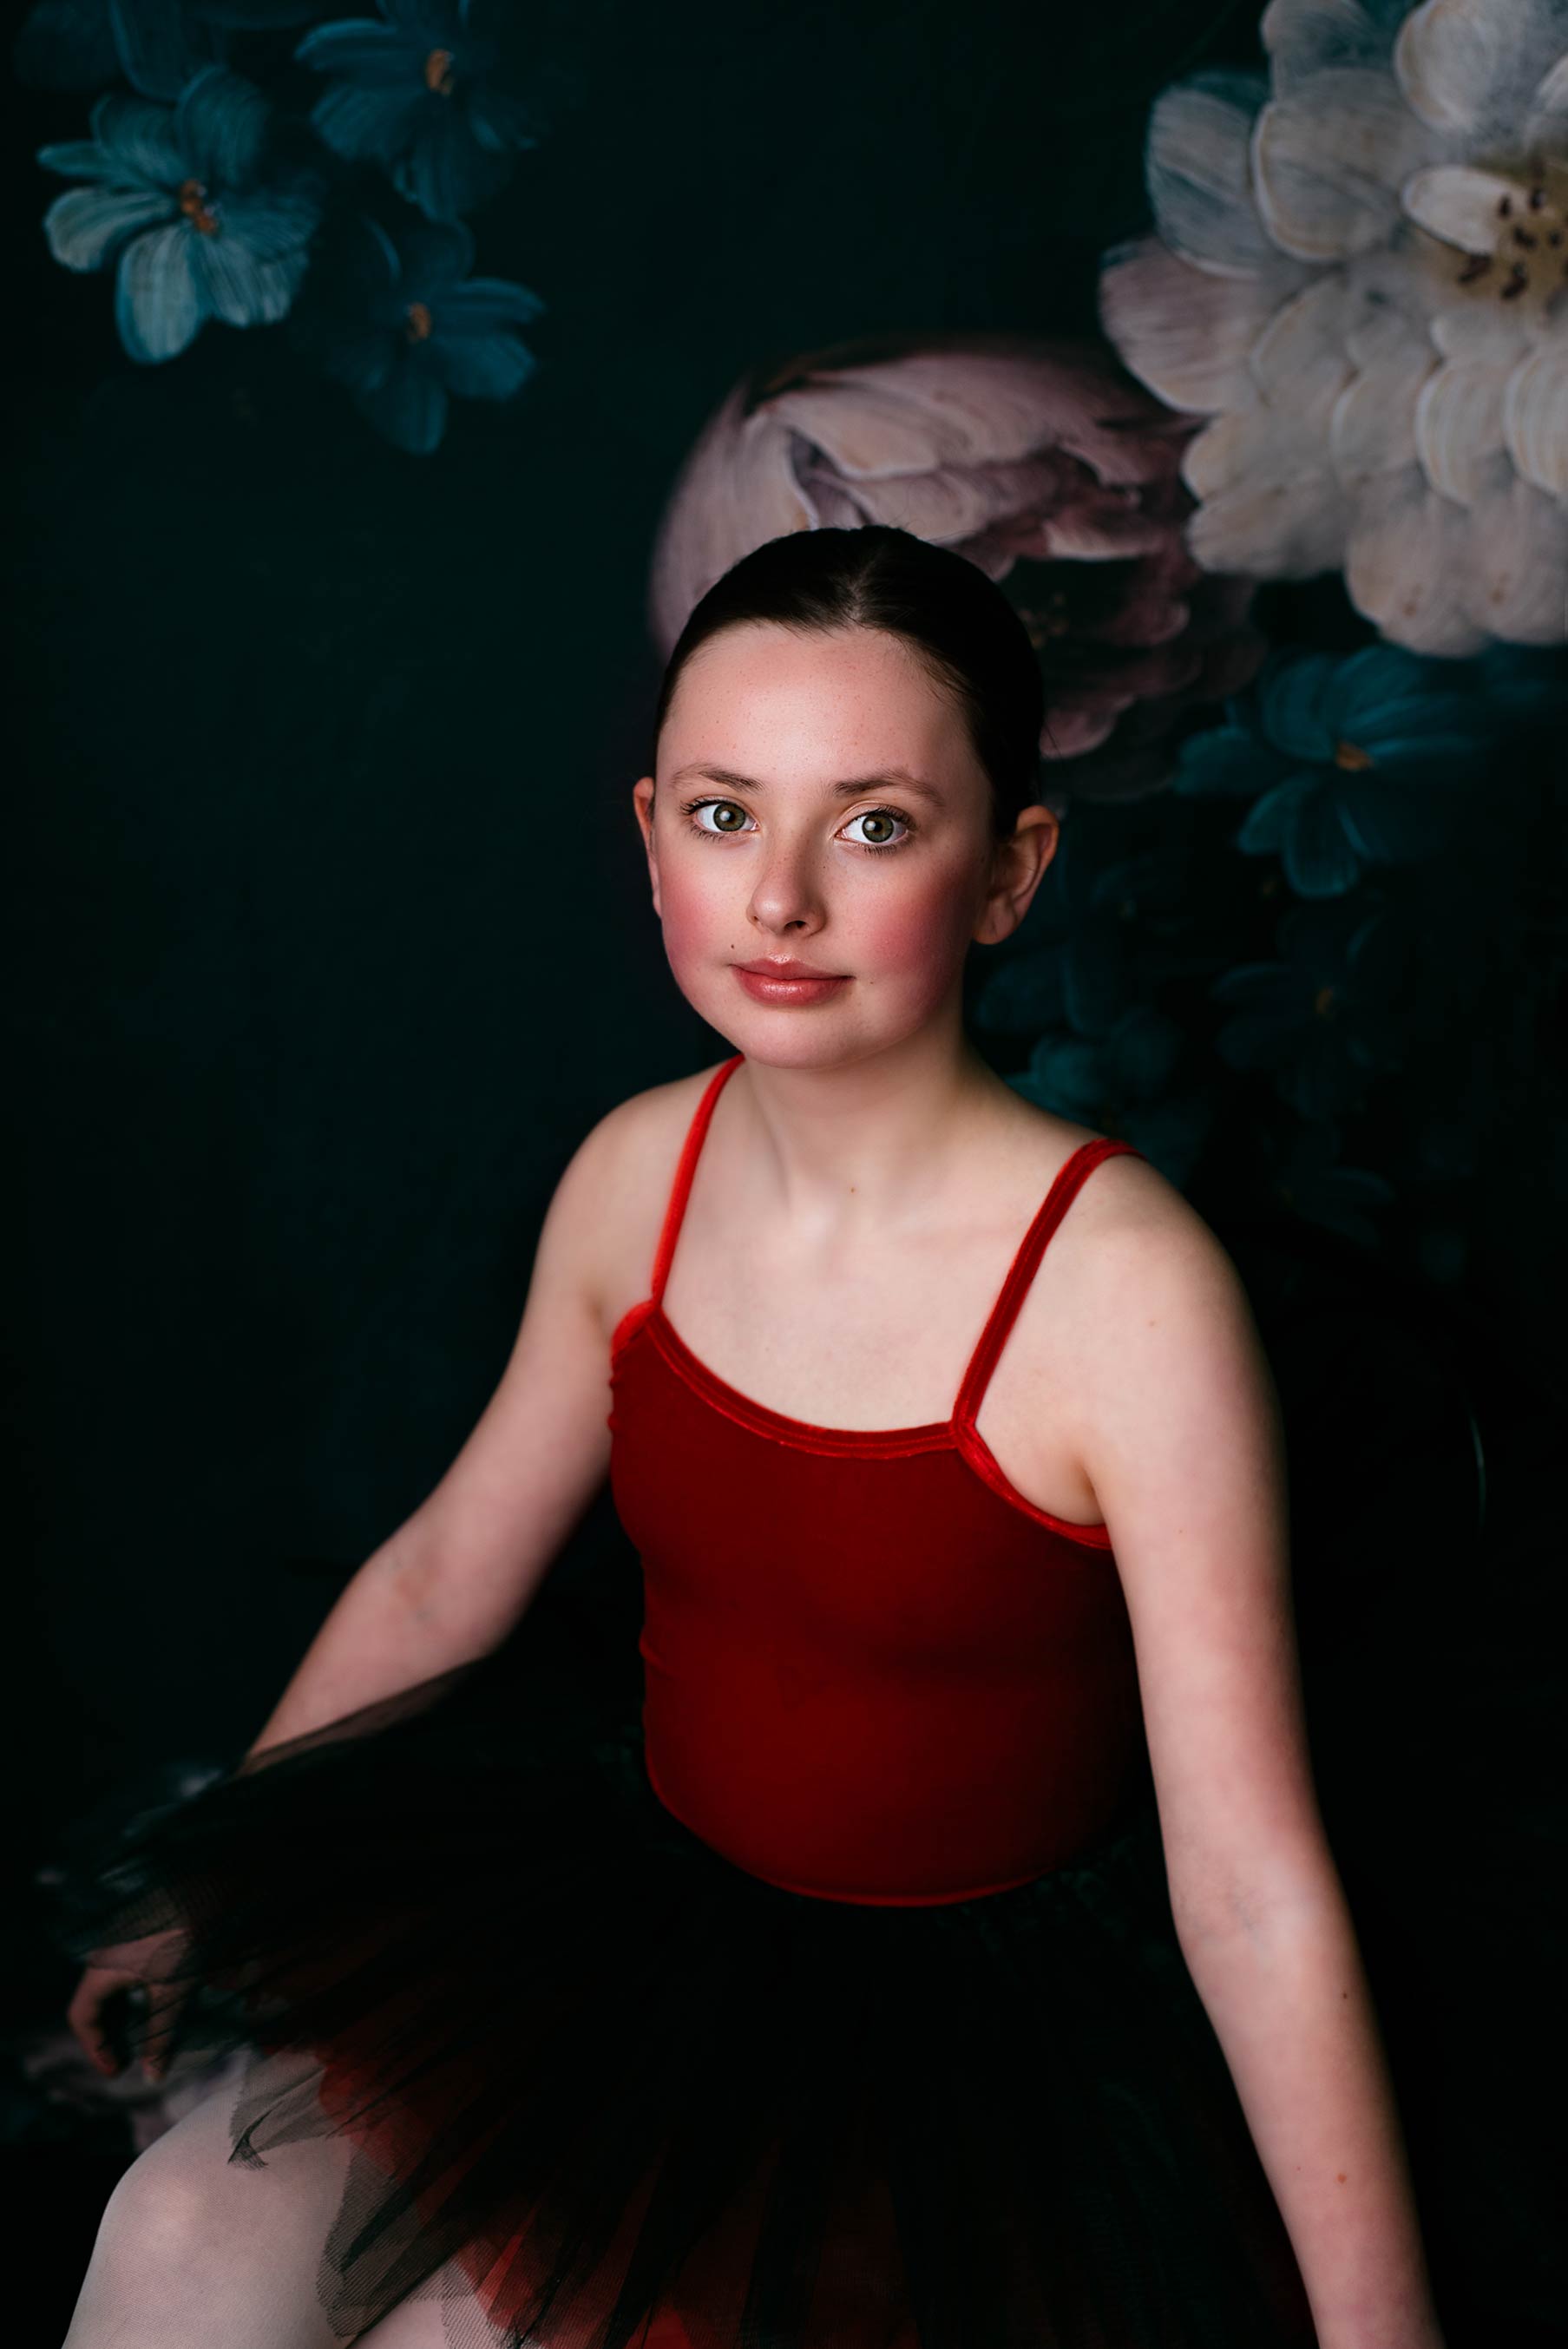 Dance photoshoot by Appleberry studio on location for Stargaze Dance Academy in Bolton specialising in Ballet, Contemporary, Tap and Modern Dance Genres.